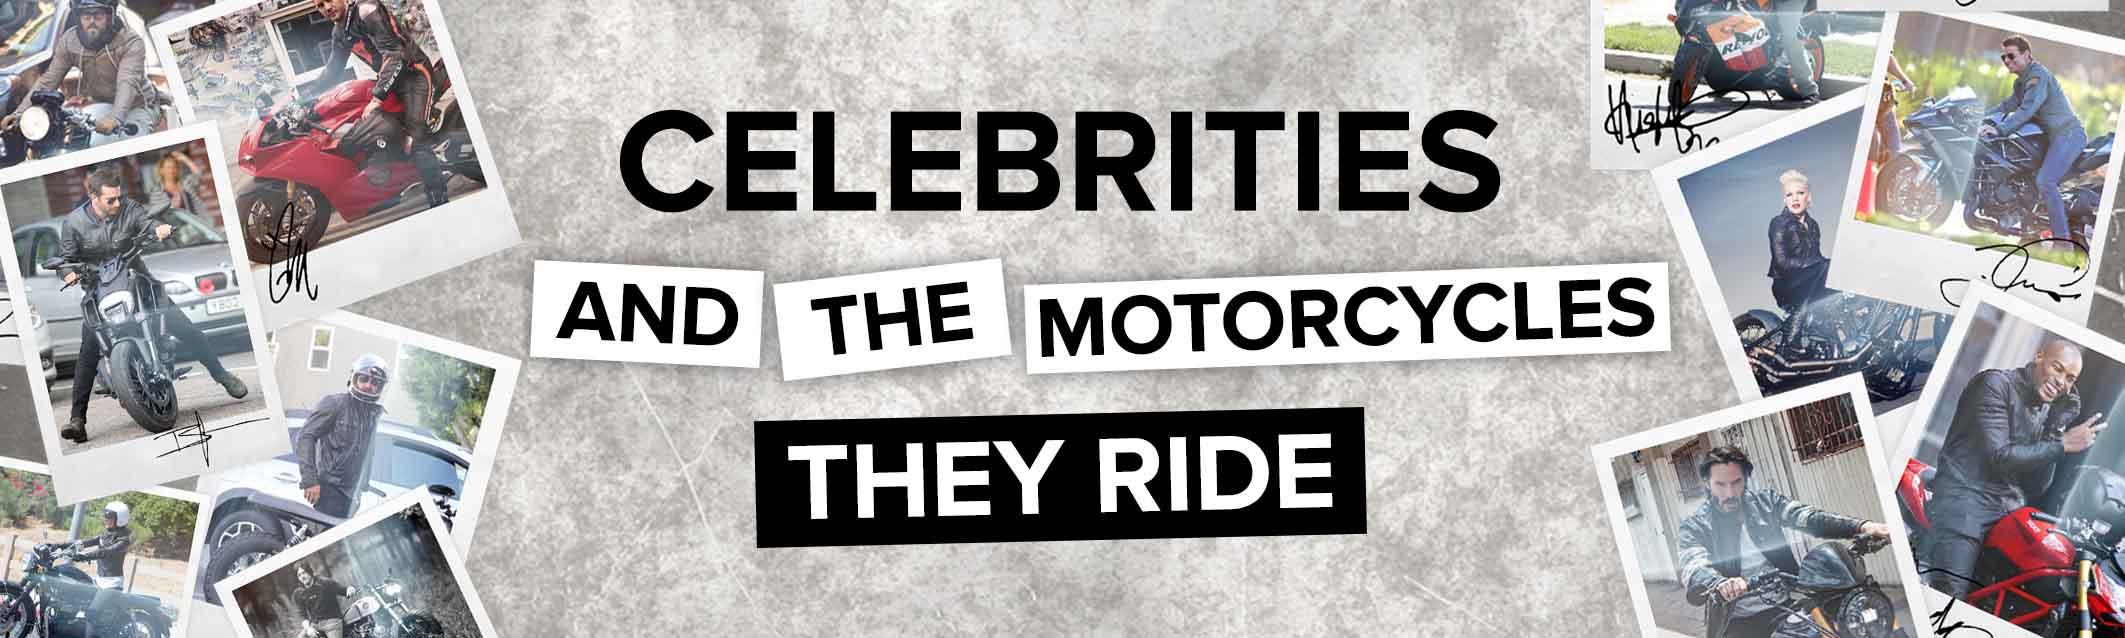 Celebrities and the motorcycles they ride banner